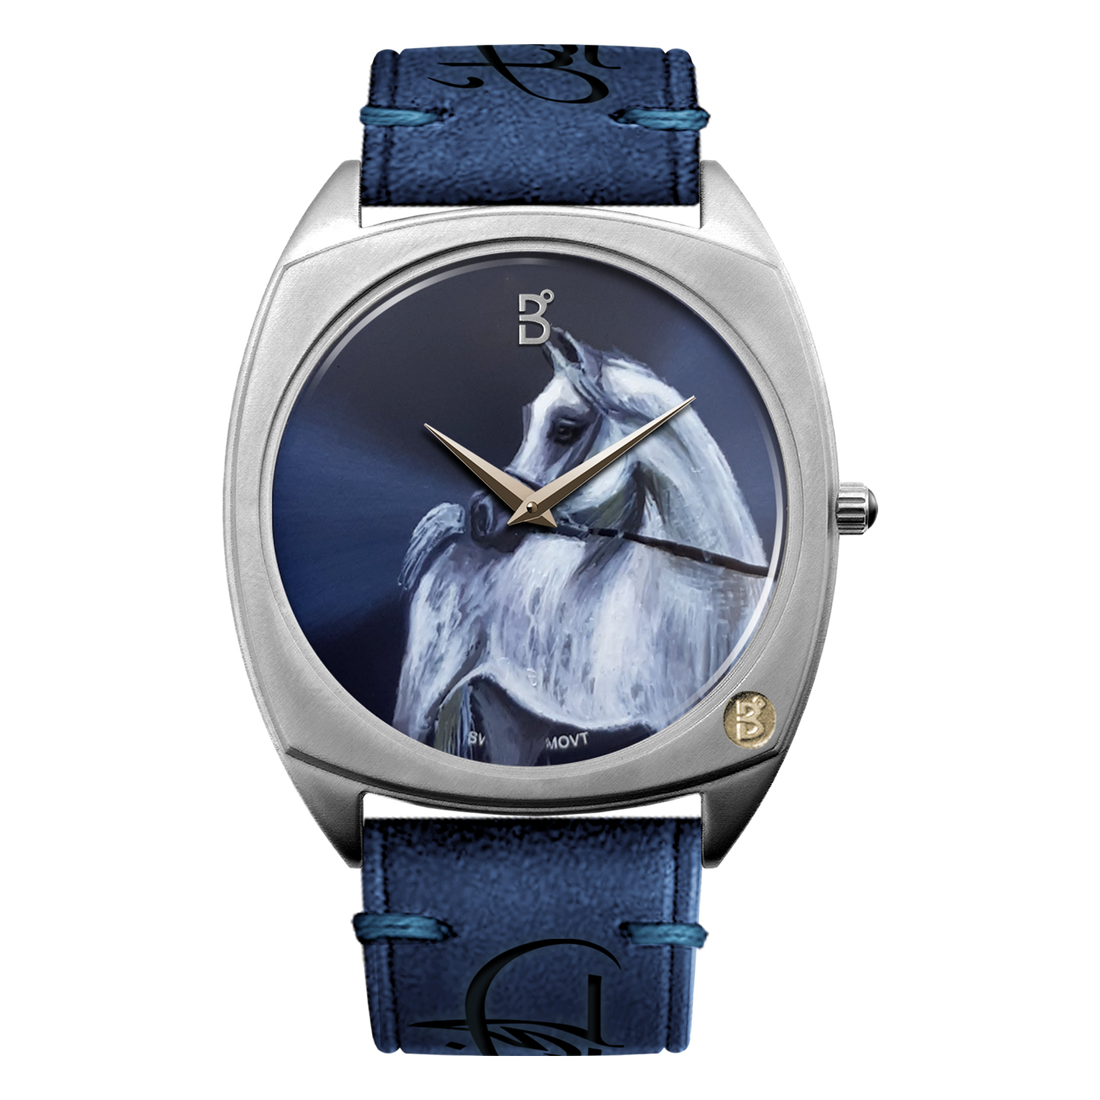 B360-Watches-We have created over 70 hand painted watches, one for each horse. Each watch comes with a signed certificate by our artists and marked as 1 out of 1. Check out our Arabian Horses collections. 